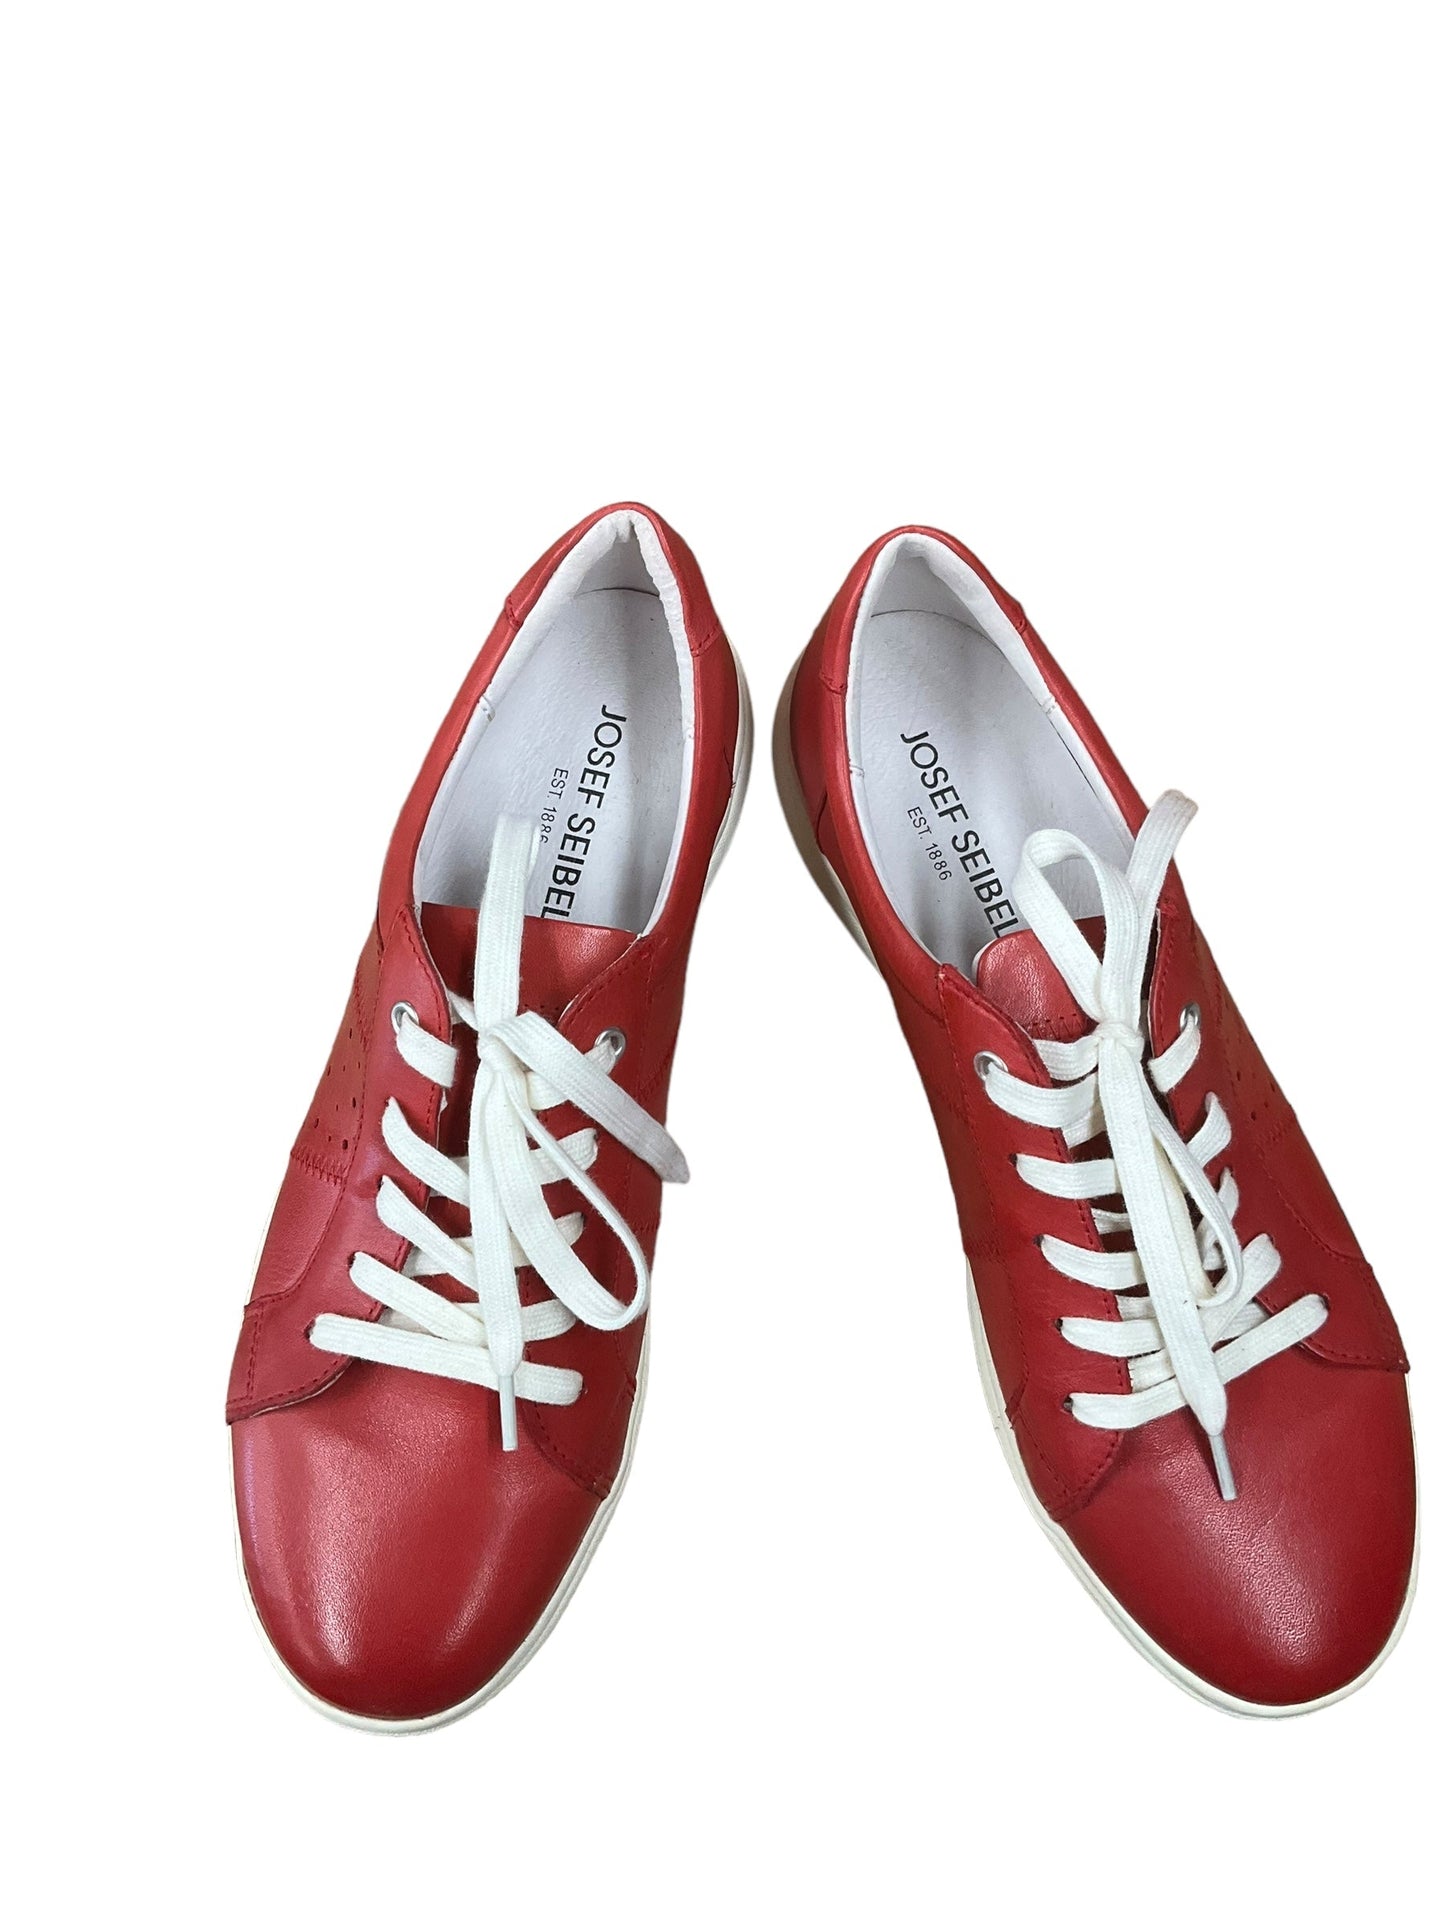 Red Shoes Sneakers Josef Seibel, Size 9